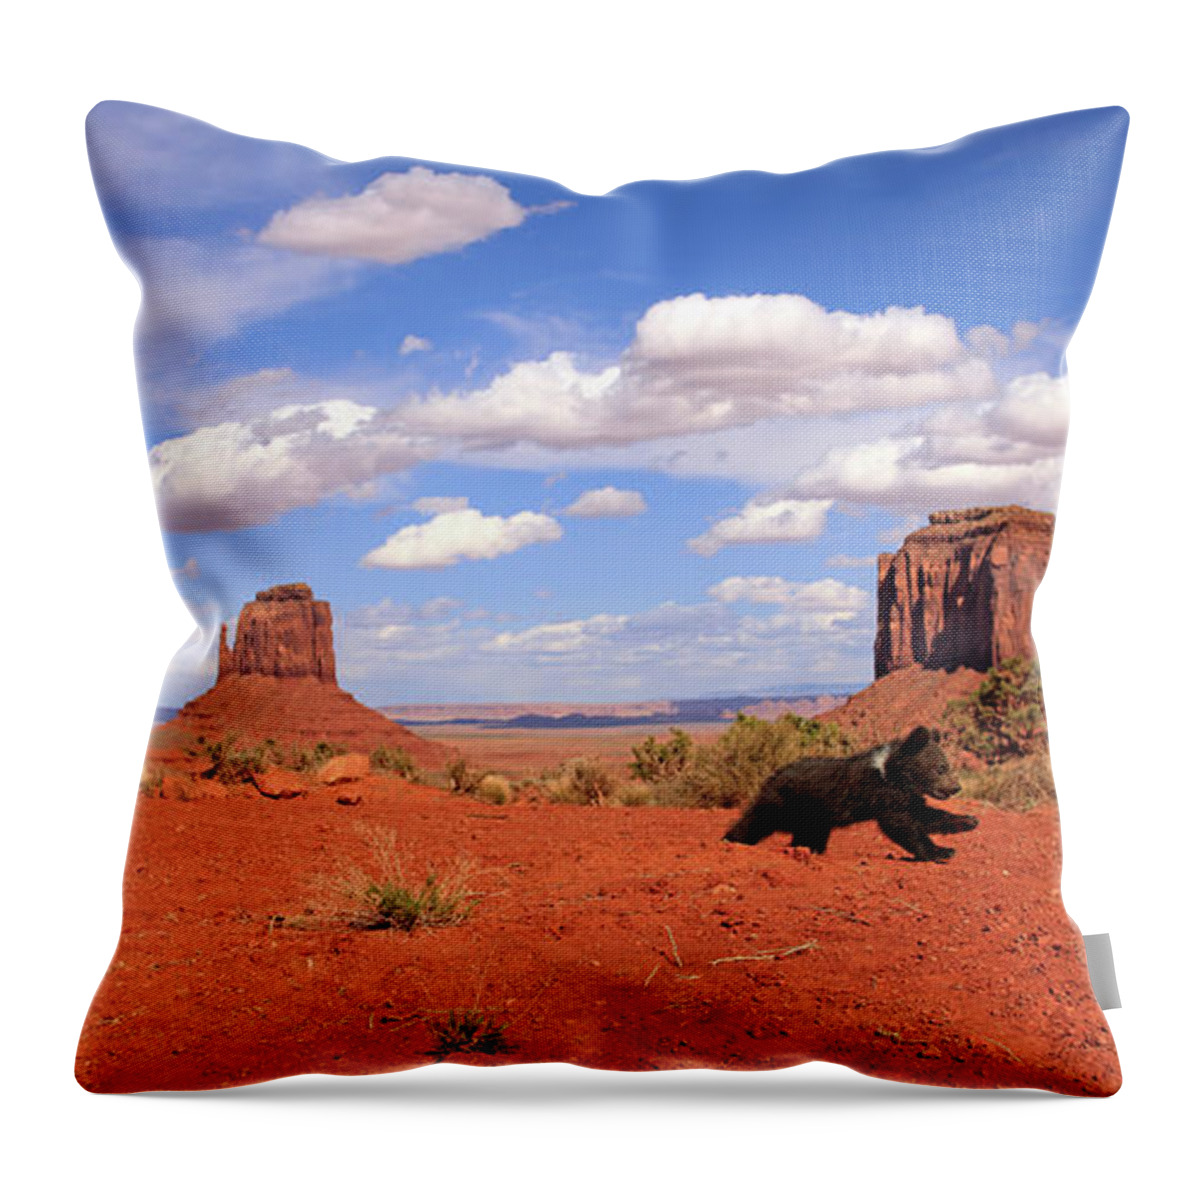 Scenics Throw Pillow featuring the photograph Grizzly Bear #3 by Tier Und Naturfotografie J Und C Sohns